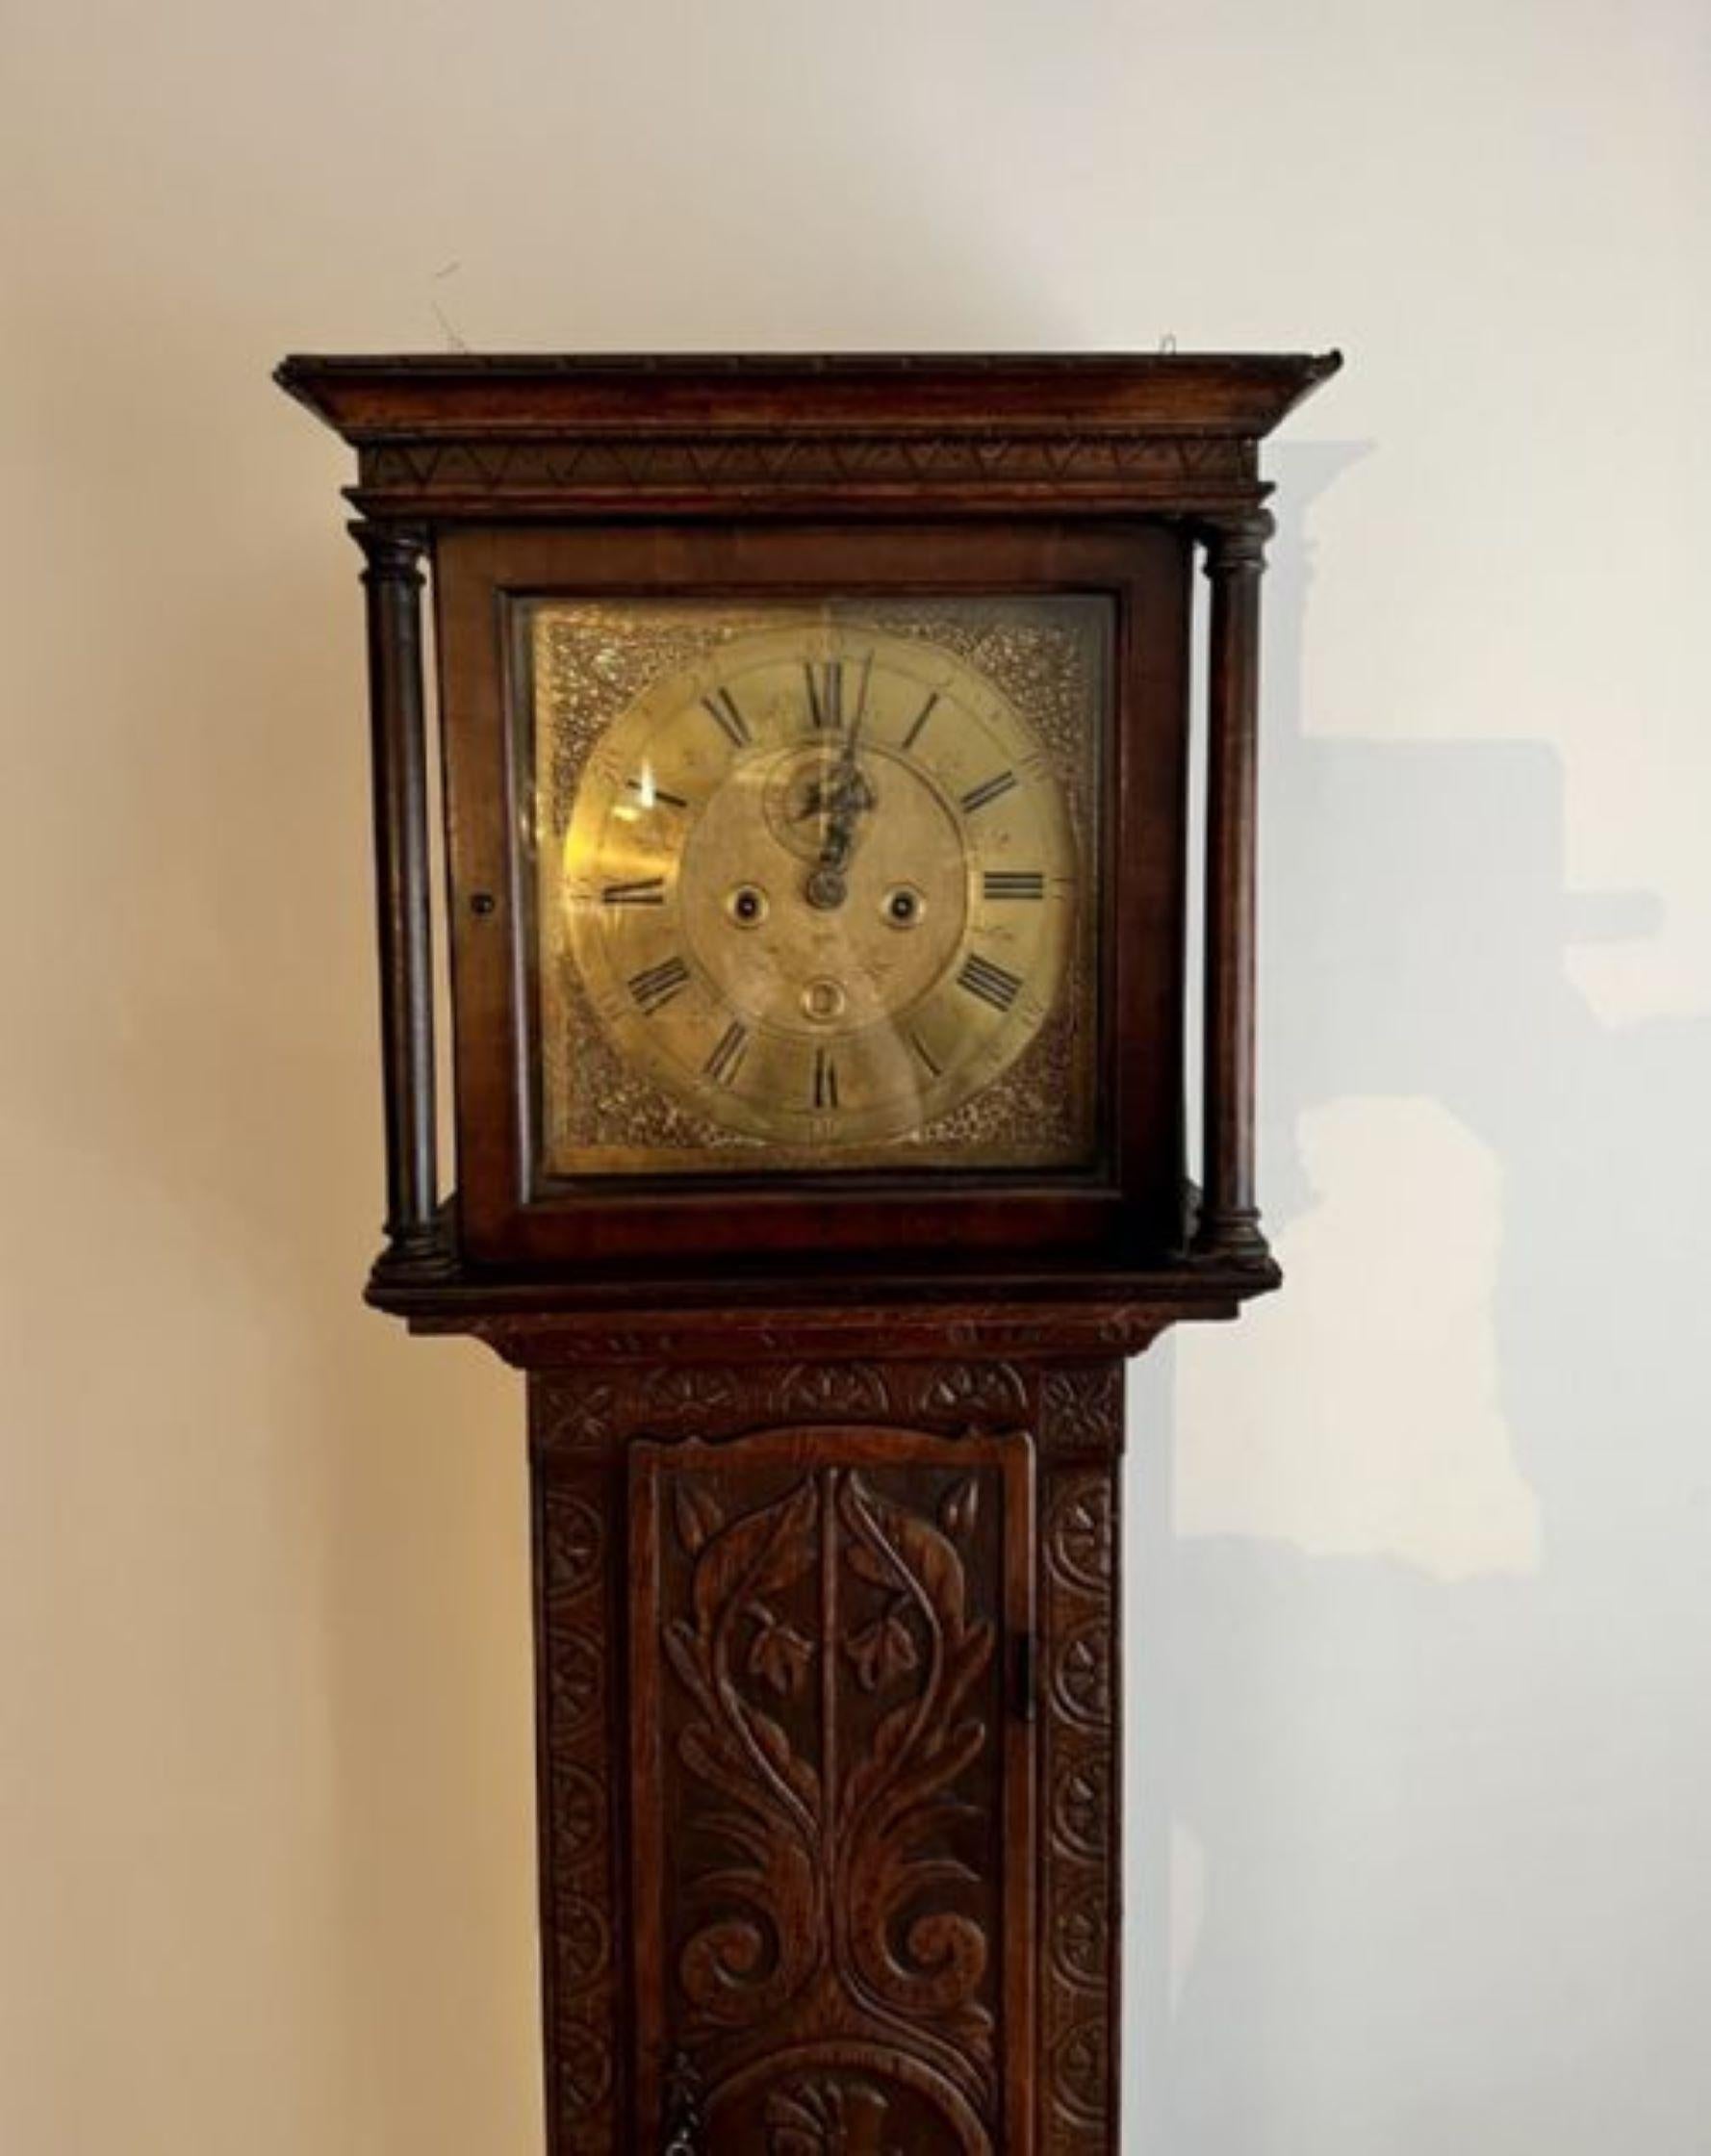 Antique George III quality carved oak brass face long case clock having a quality George III long case clock in a wonderful carved oak case with a square brass dial with original hands having an 8 day movement striking on the hour and half hour on a